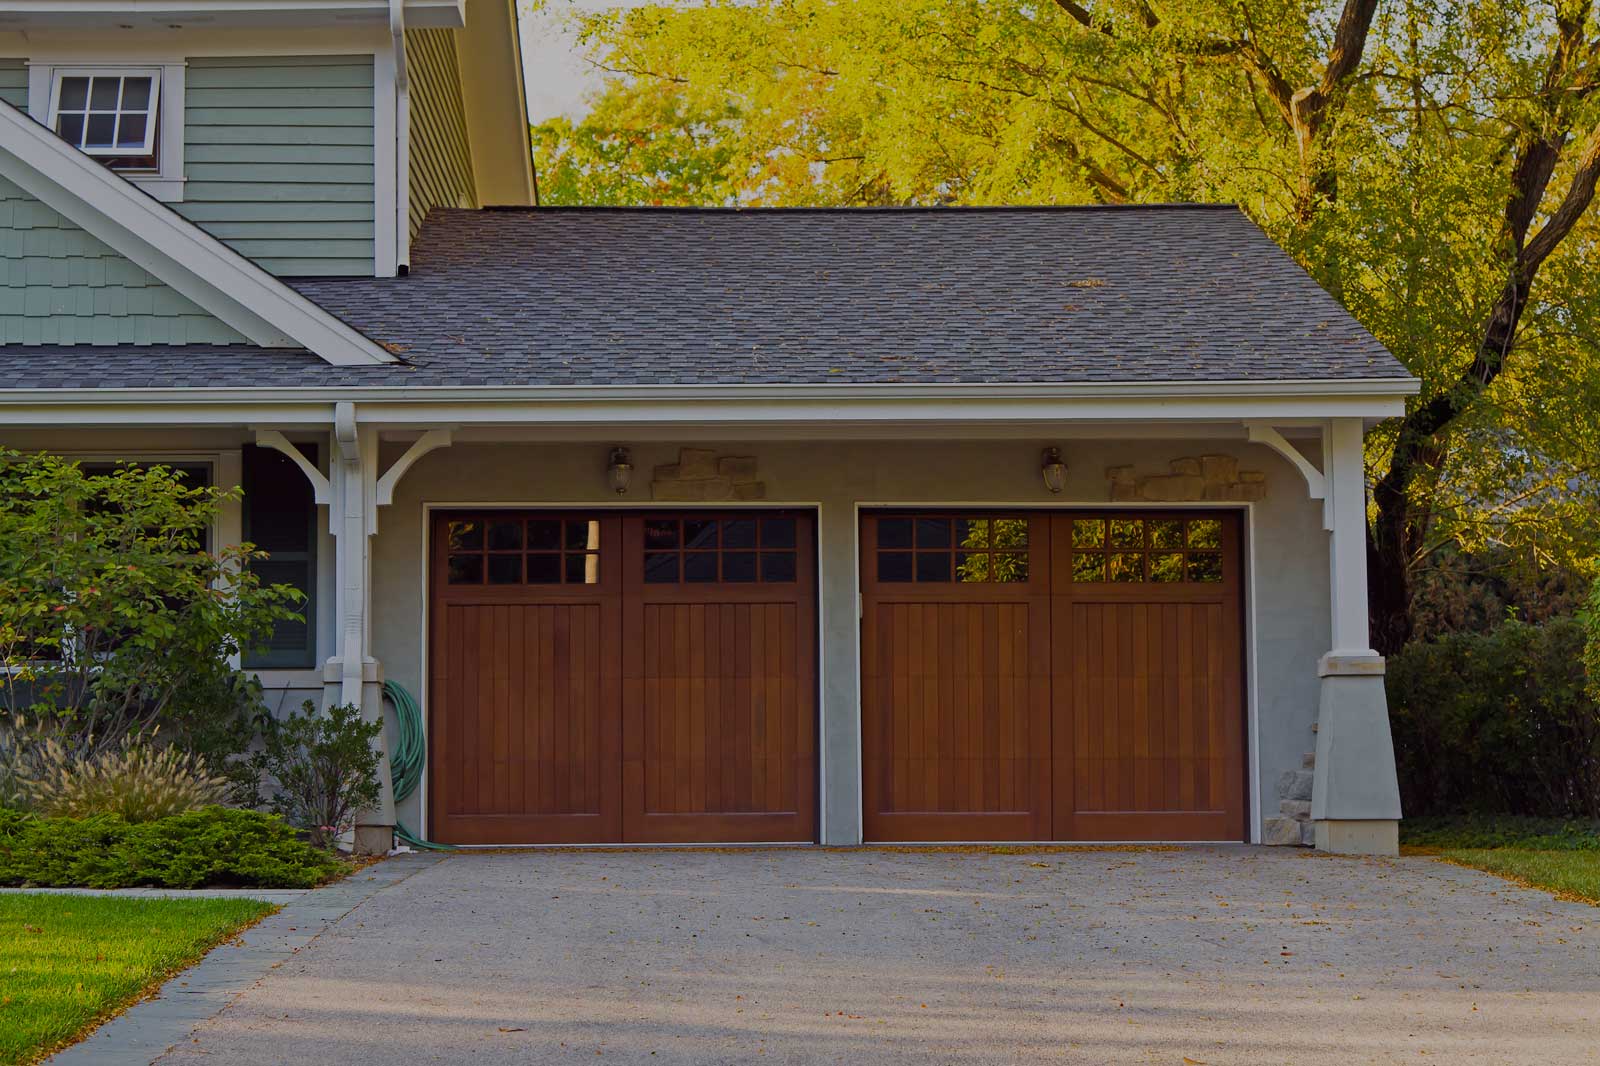 This is an image of a wood Spanish style garage door in Laguna Hills, CA.